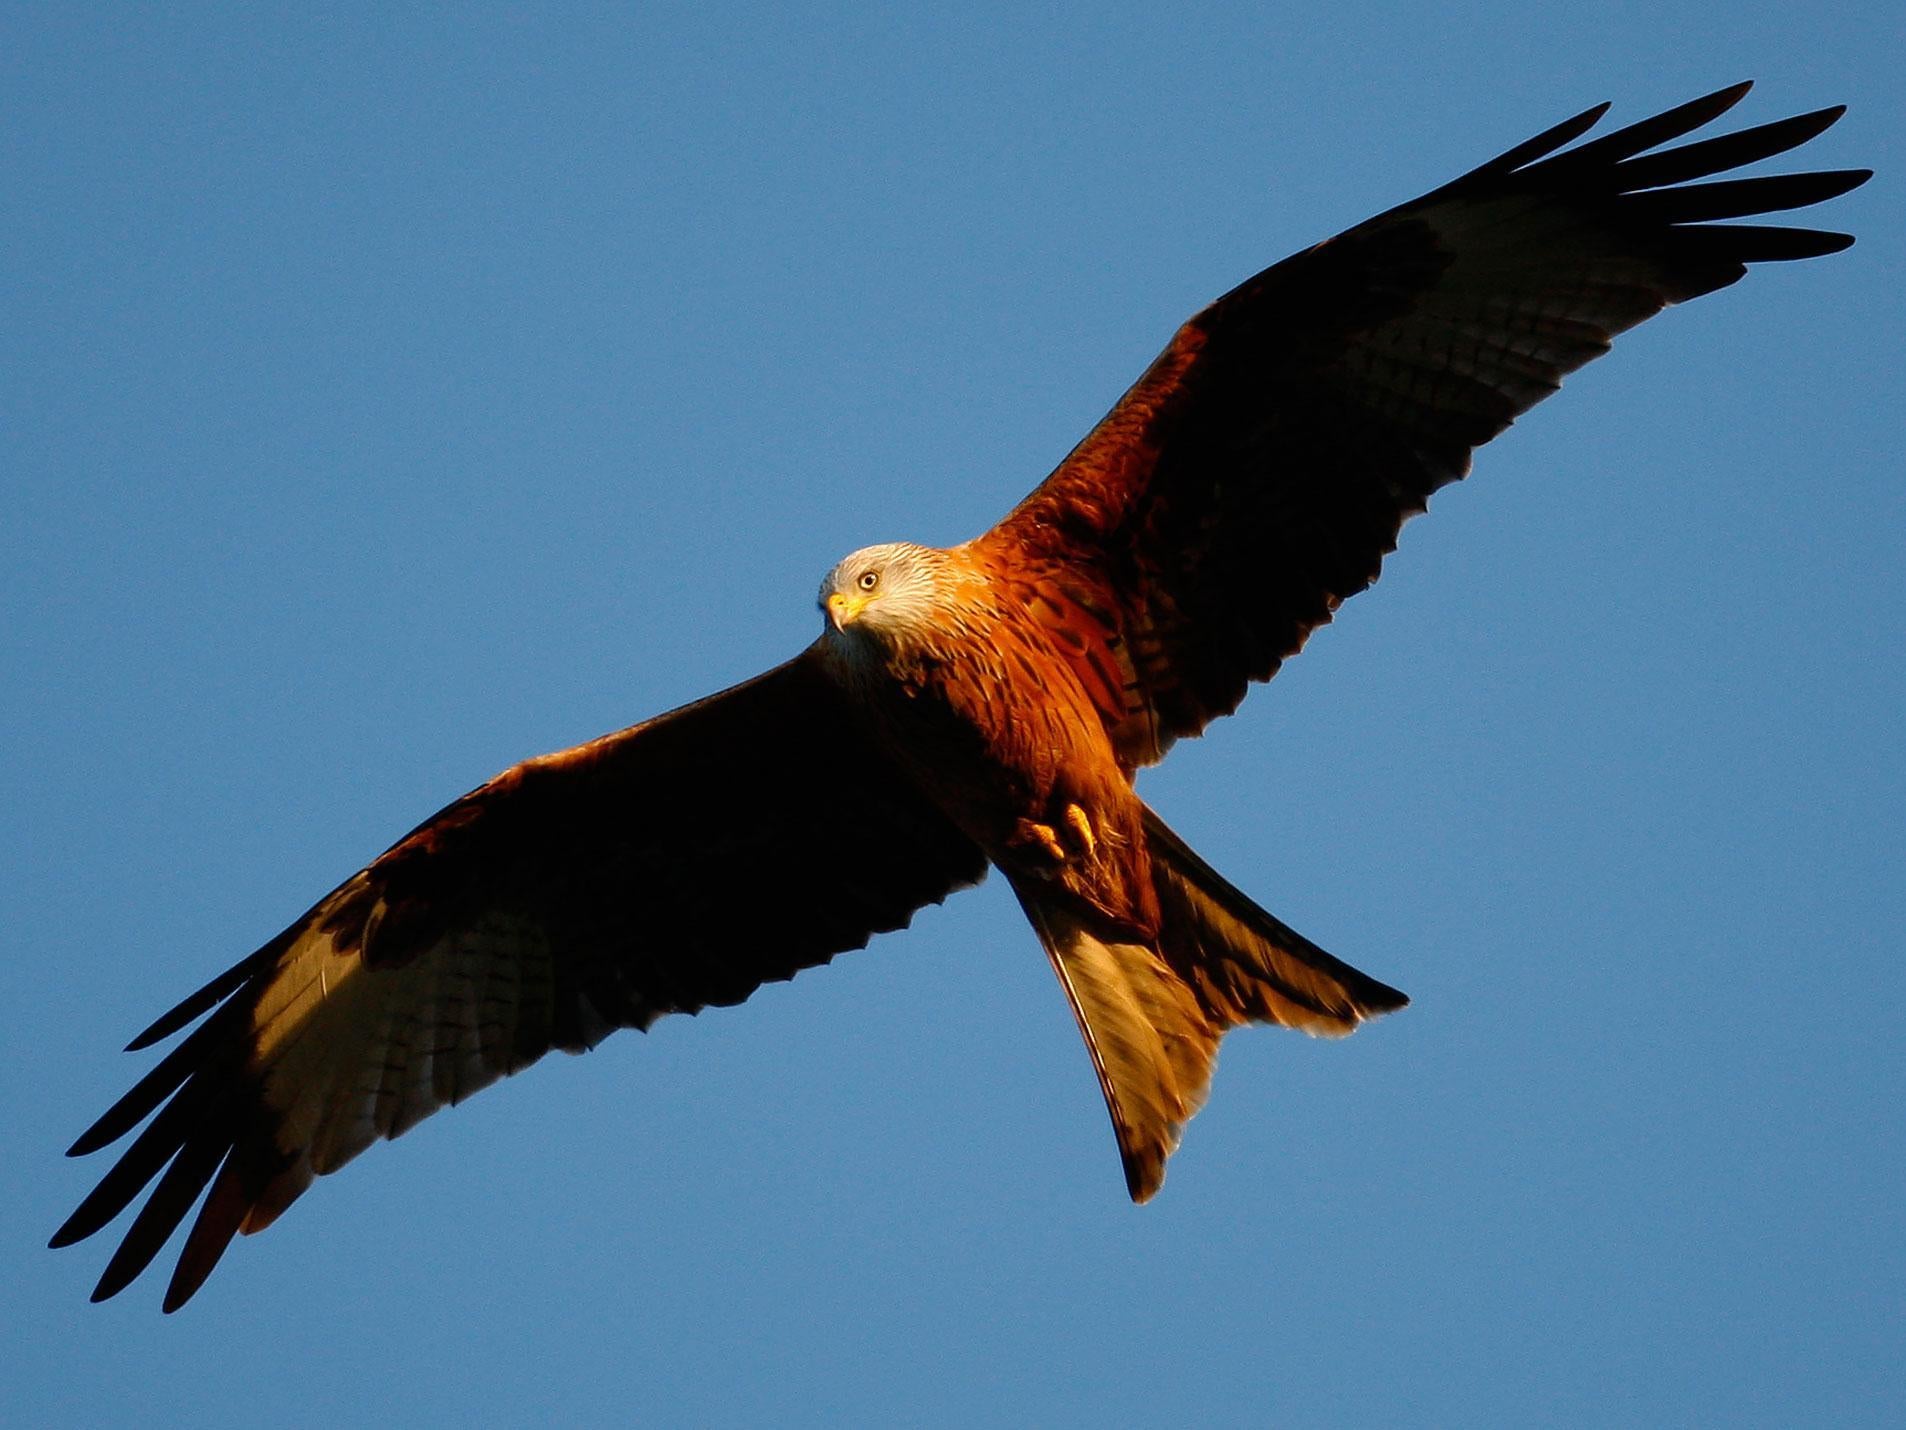 Red kites have been a relative success story with numbers increasing significantly